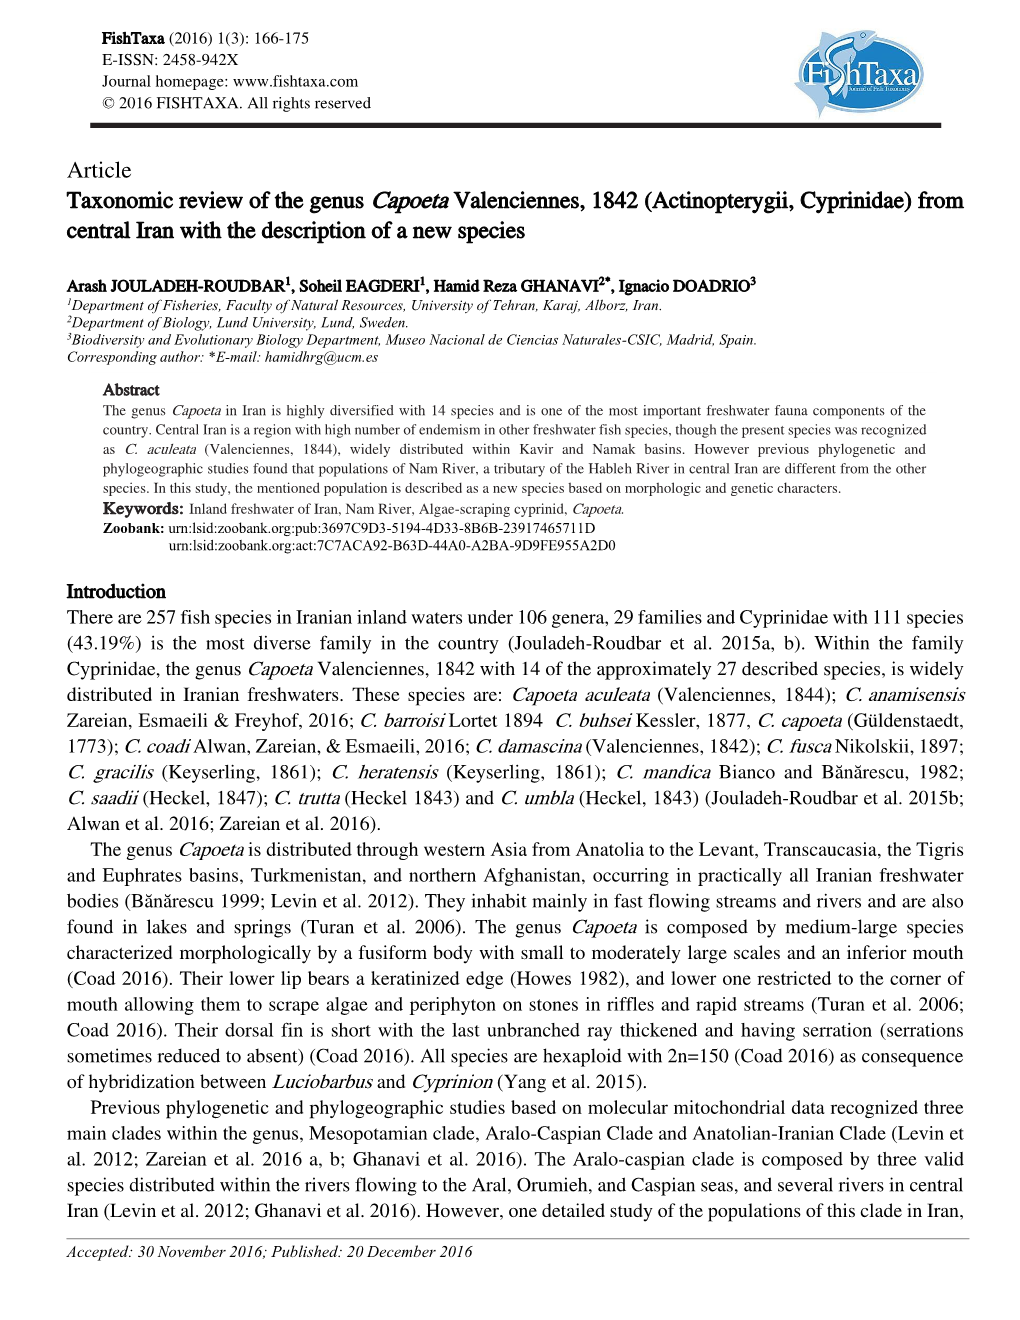 Article Taxonomic Review of the Genus Capoeta Valenciennes, 1842 (Actinopterygii, Cyprinidae) from Central Iran with the Description of a New Species